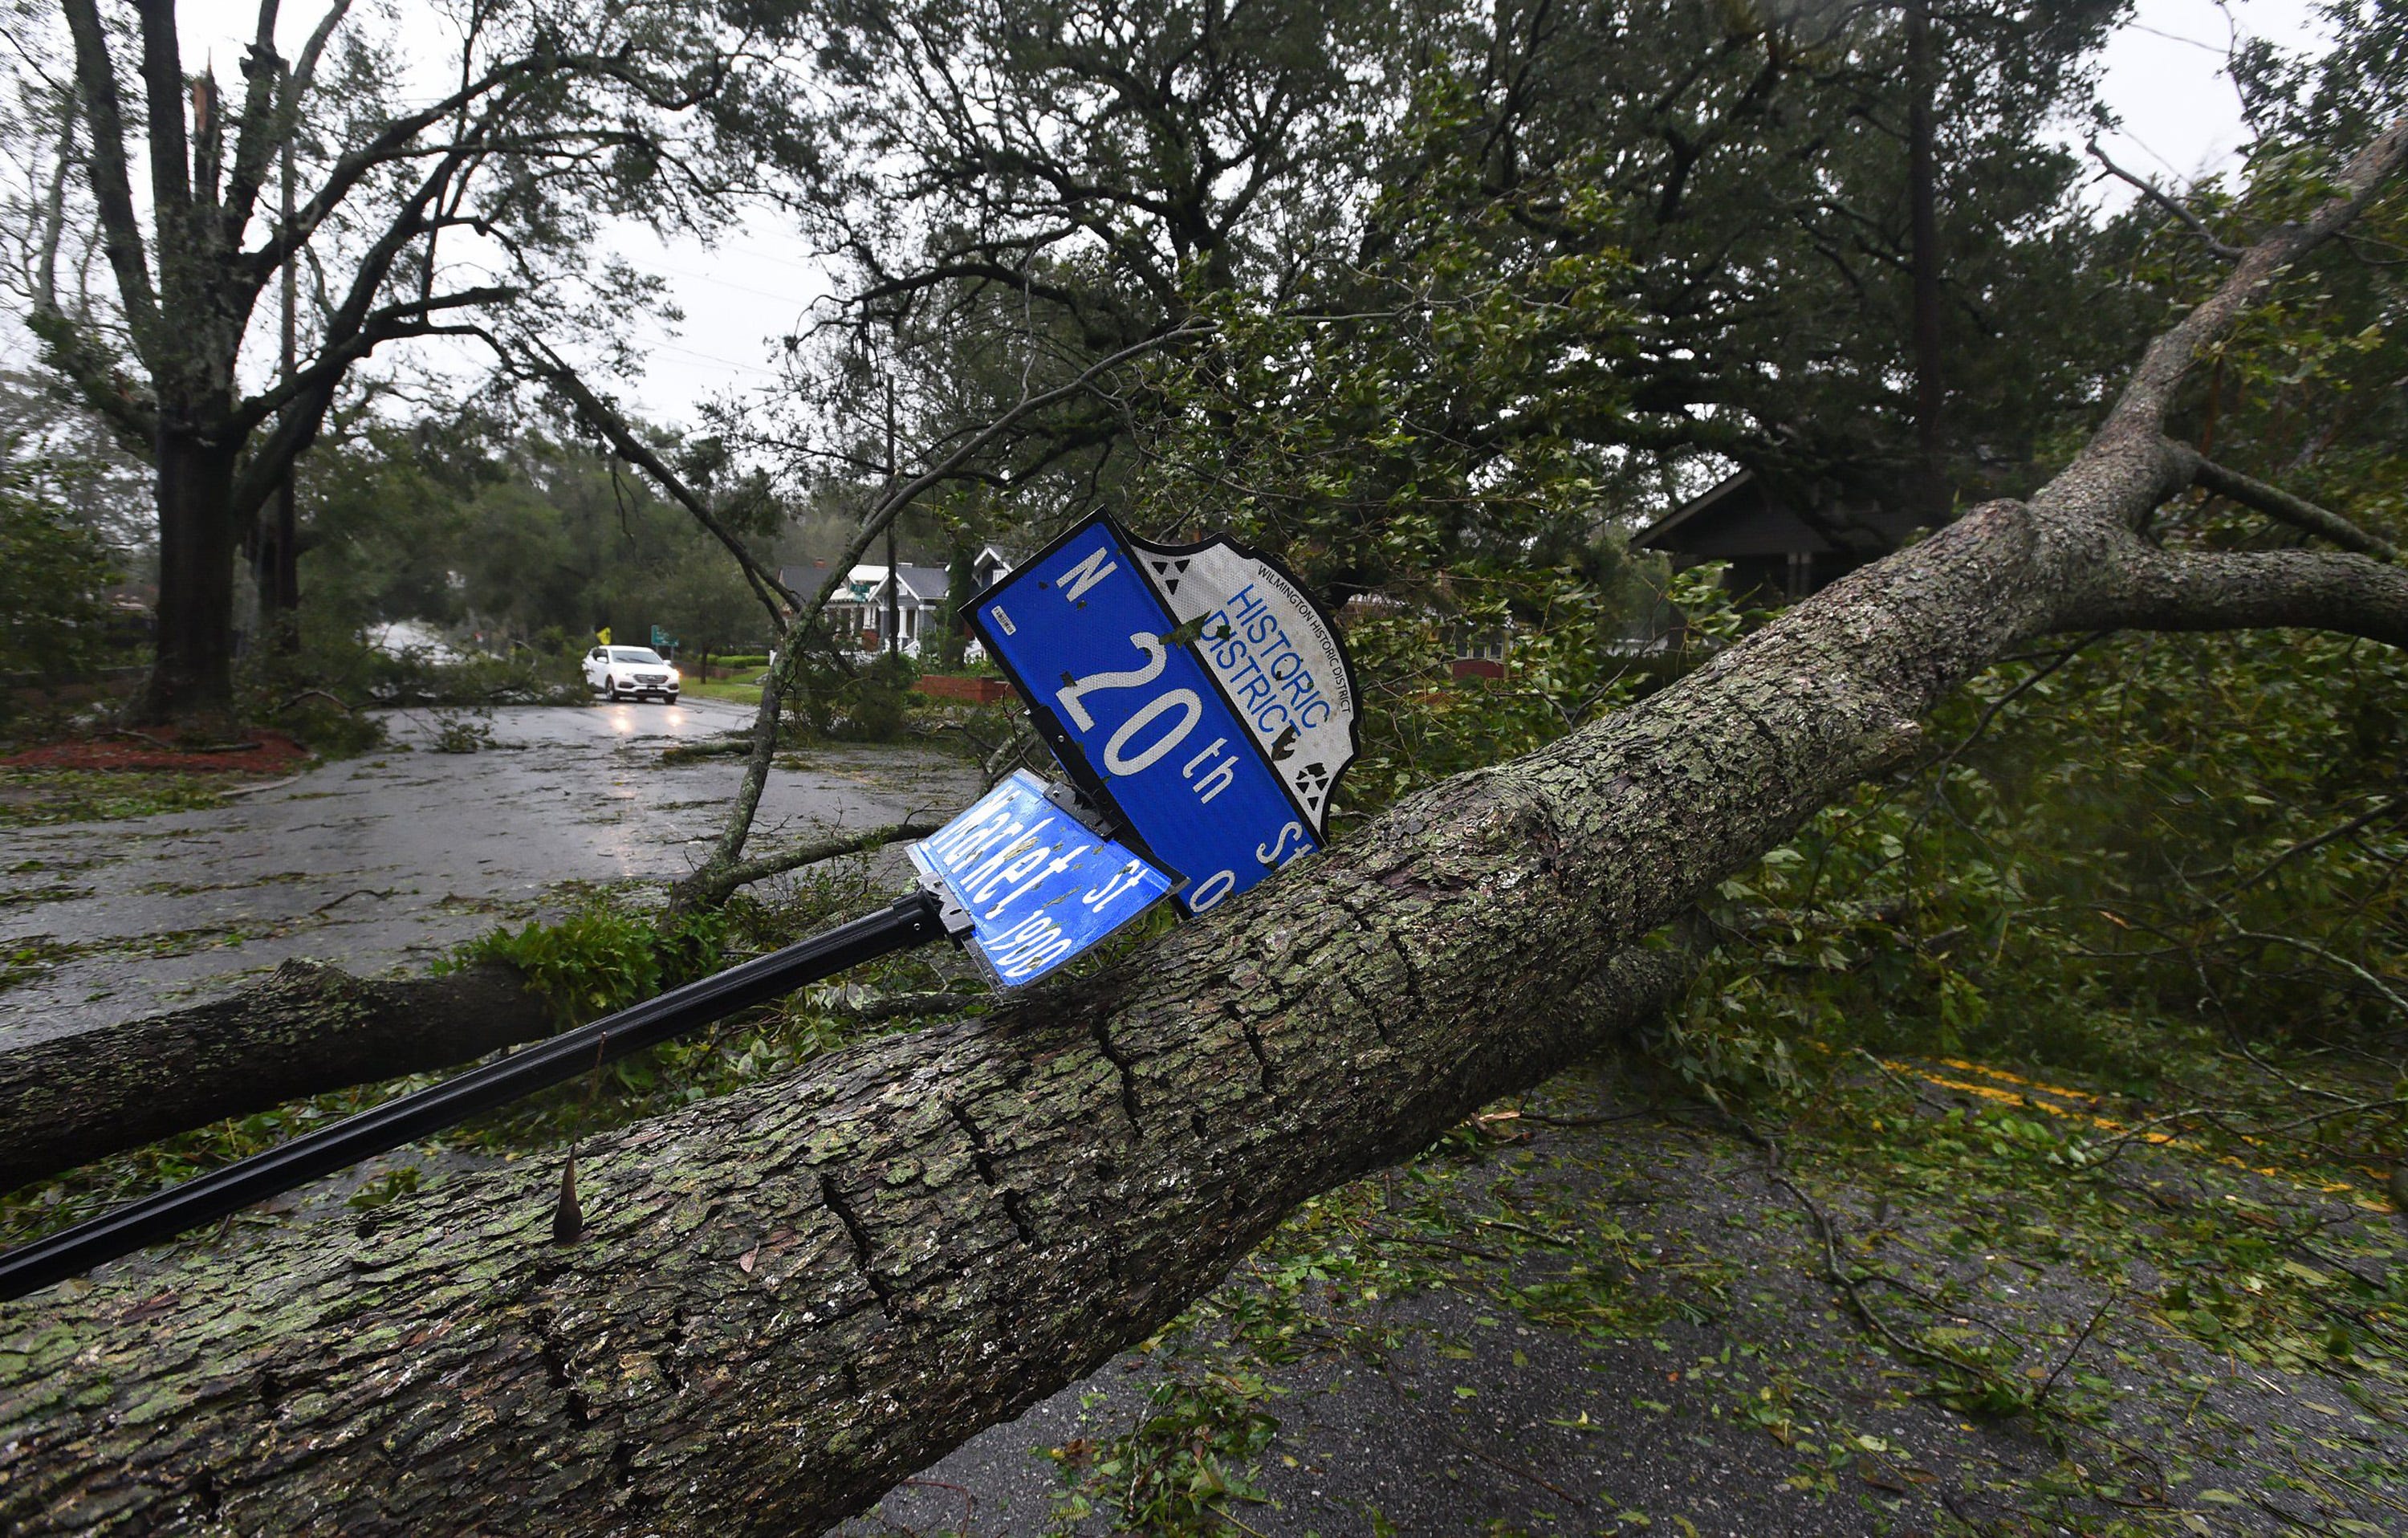 Dozens of downed trees block Market Street in the Historic District of Wilmington, N.C. as Hurricane Florence made landfall Friday Sept. 14, 2018.  (Chuck Liddy/The News & Observer/TNS)